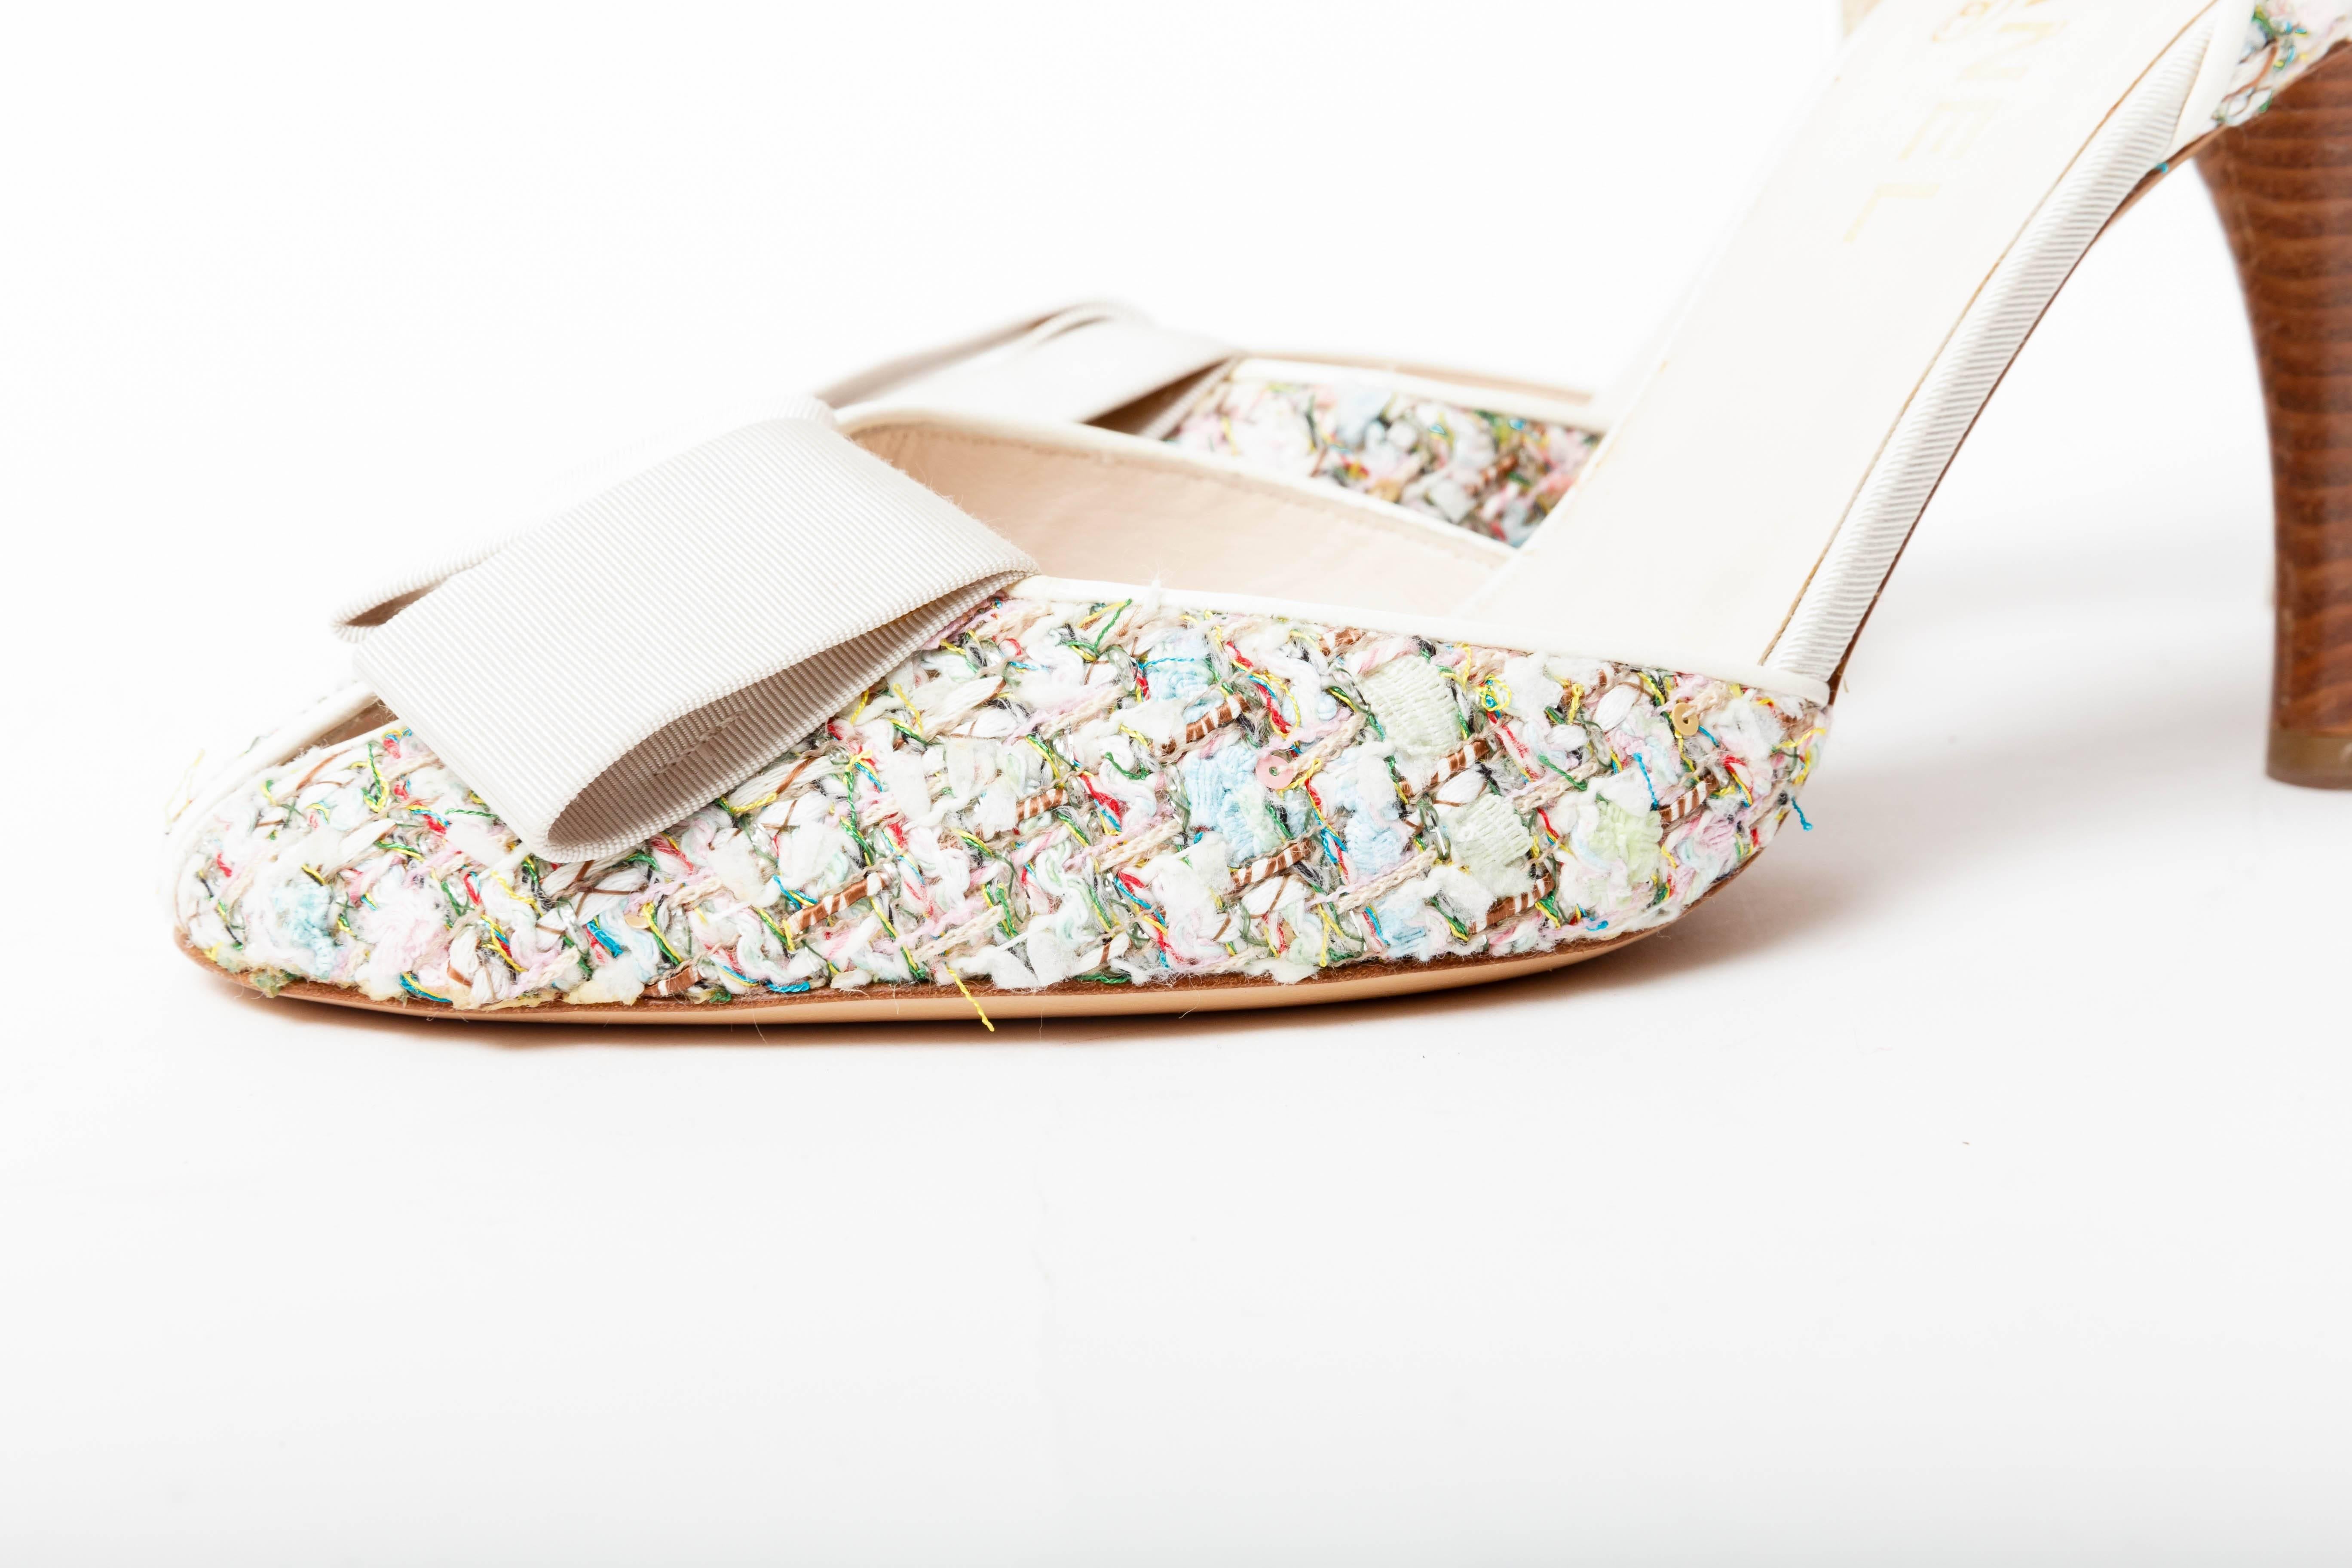 Chanel  Pastel Tweed D'Orsay Pumps with Grosgrain Ribbon Bows 3